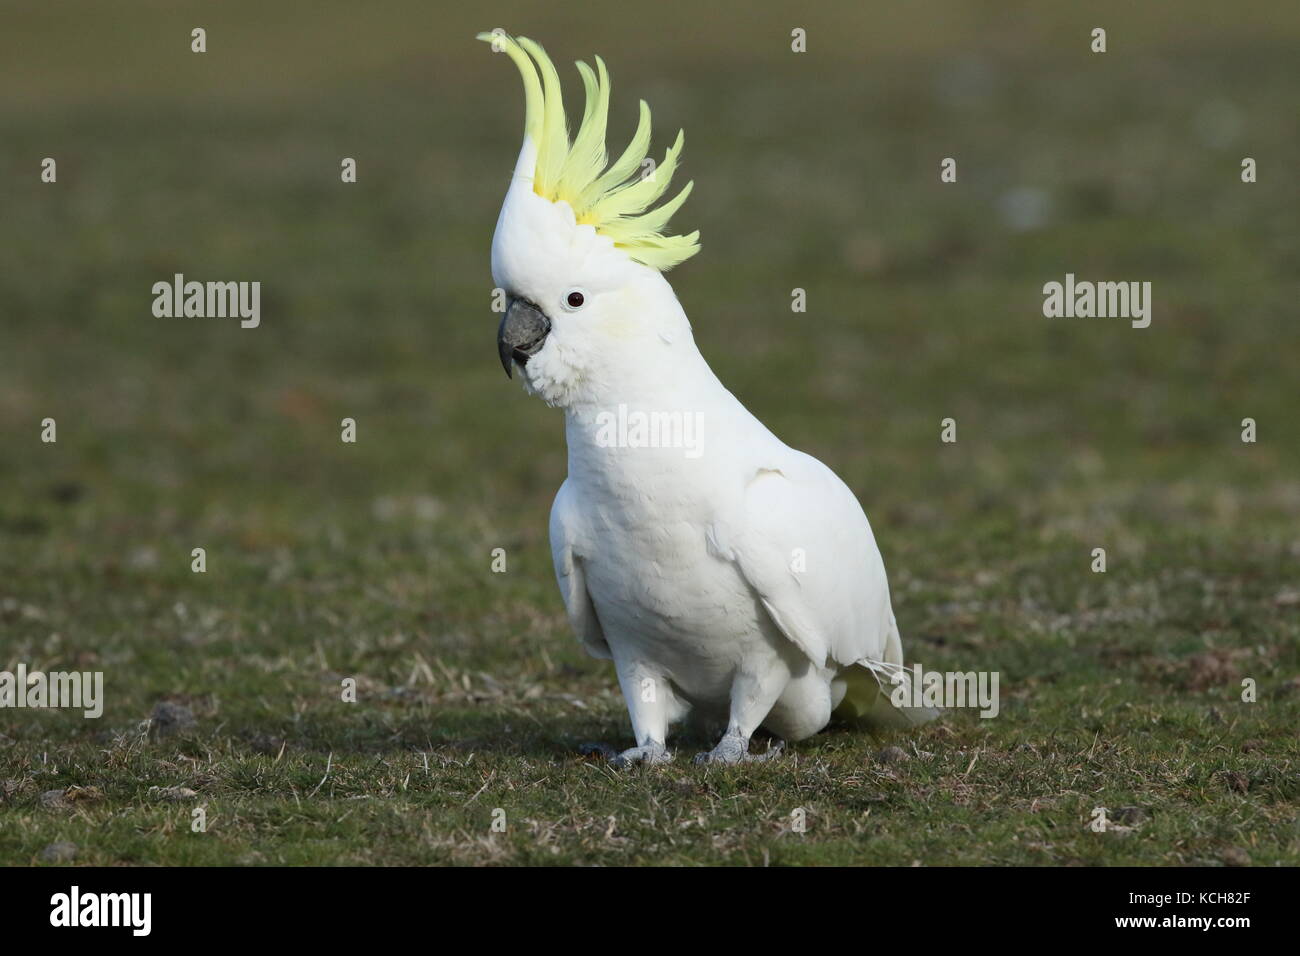 sulphur crested cockatoo on ground with crest raised Stock Photo